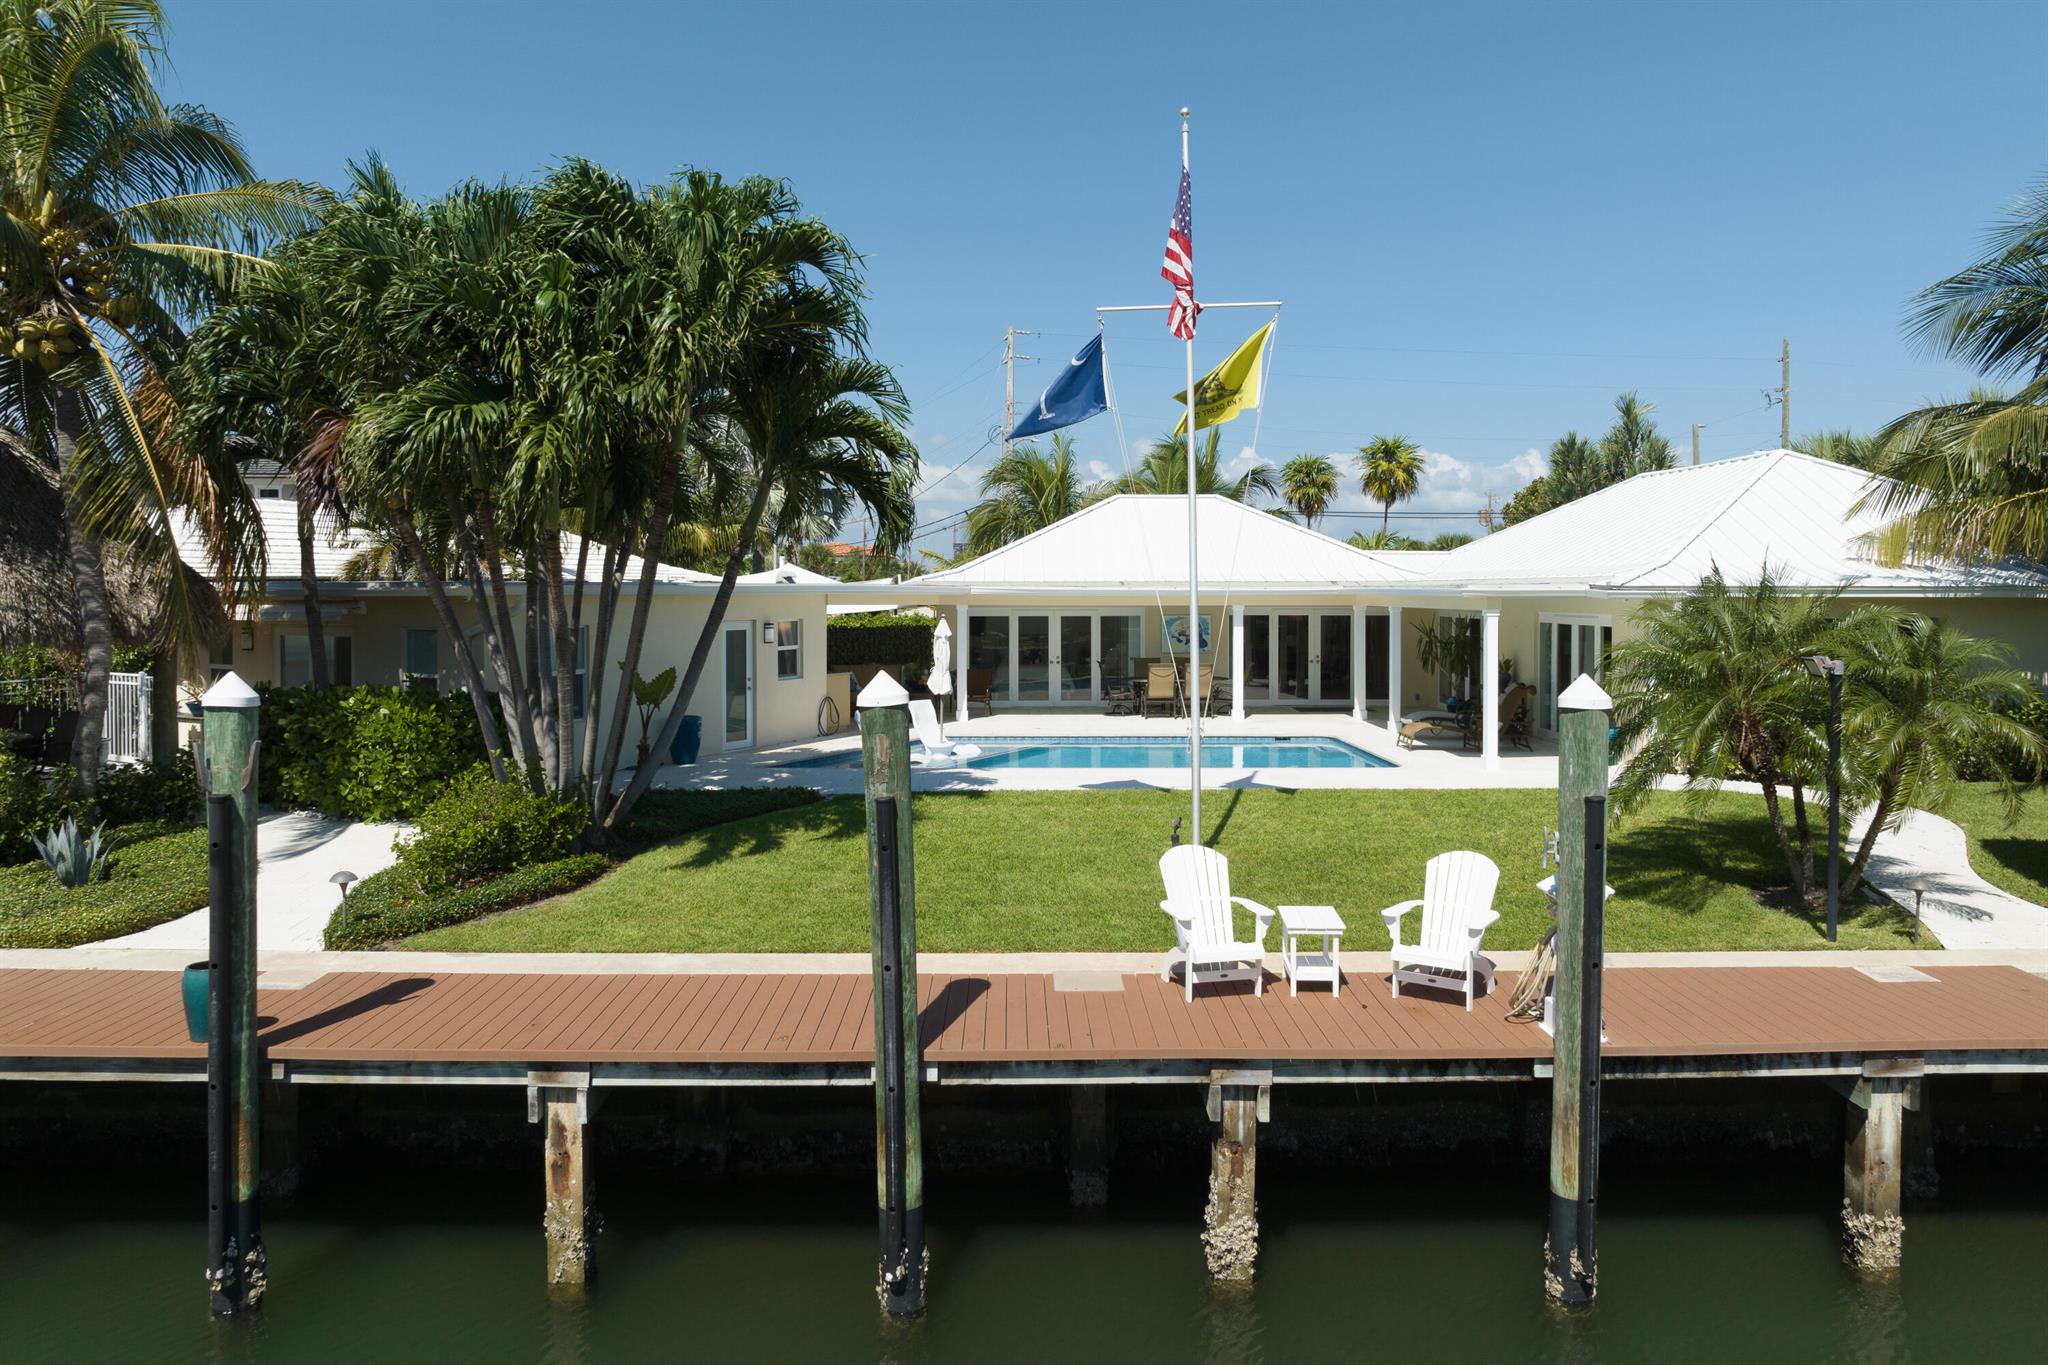 Completely High End Renovated Turnkey Waterfront Pool Home plus a fully renovated guest home with 135 Feet on the Water!  2 boat lifts including a 16,000 lb and 12,000 lb with room for a 60 foot yacht in between the 2 lifts.  Remove one of the boat lifts and there is plenty of room for an 80 foot yacht plus another large boat. Huge Custom Tiki hut with bar, grill and large tv. Call today for more details!